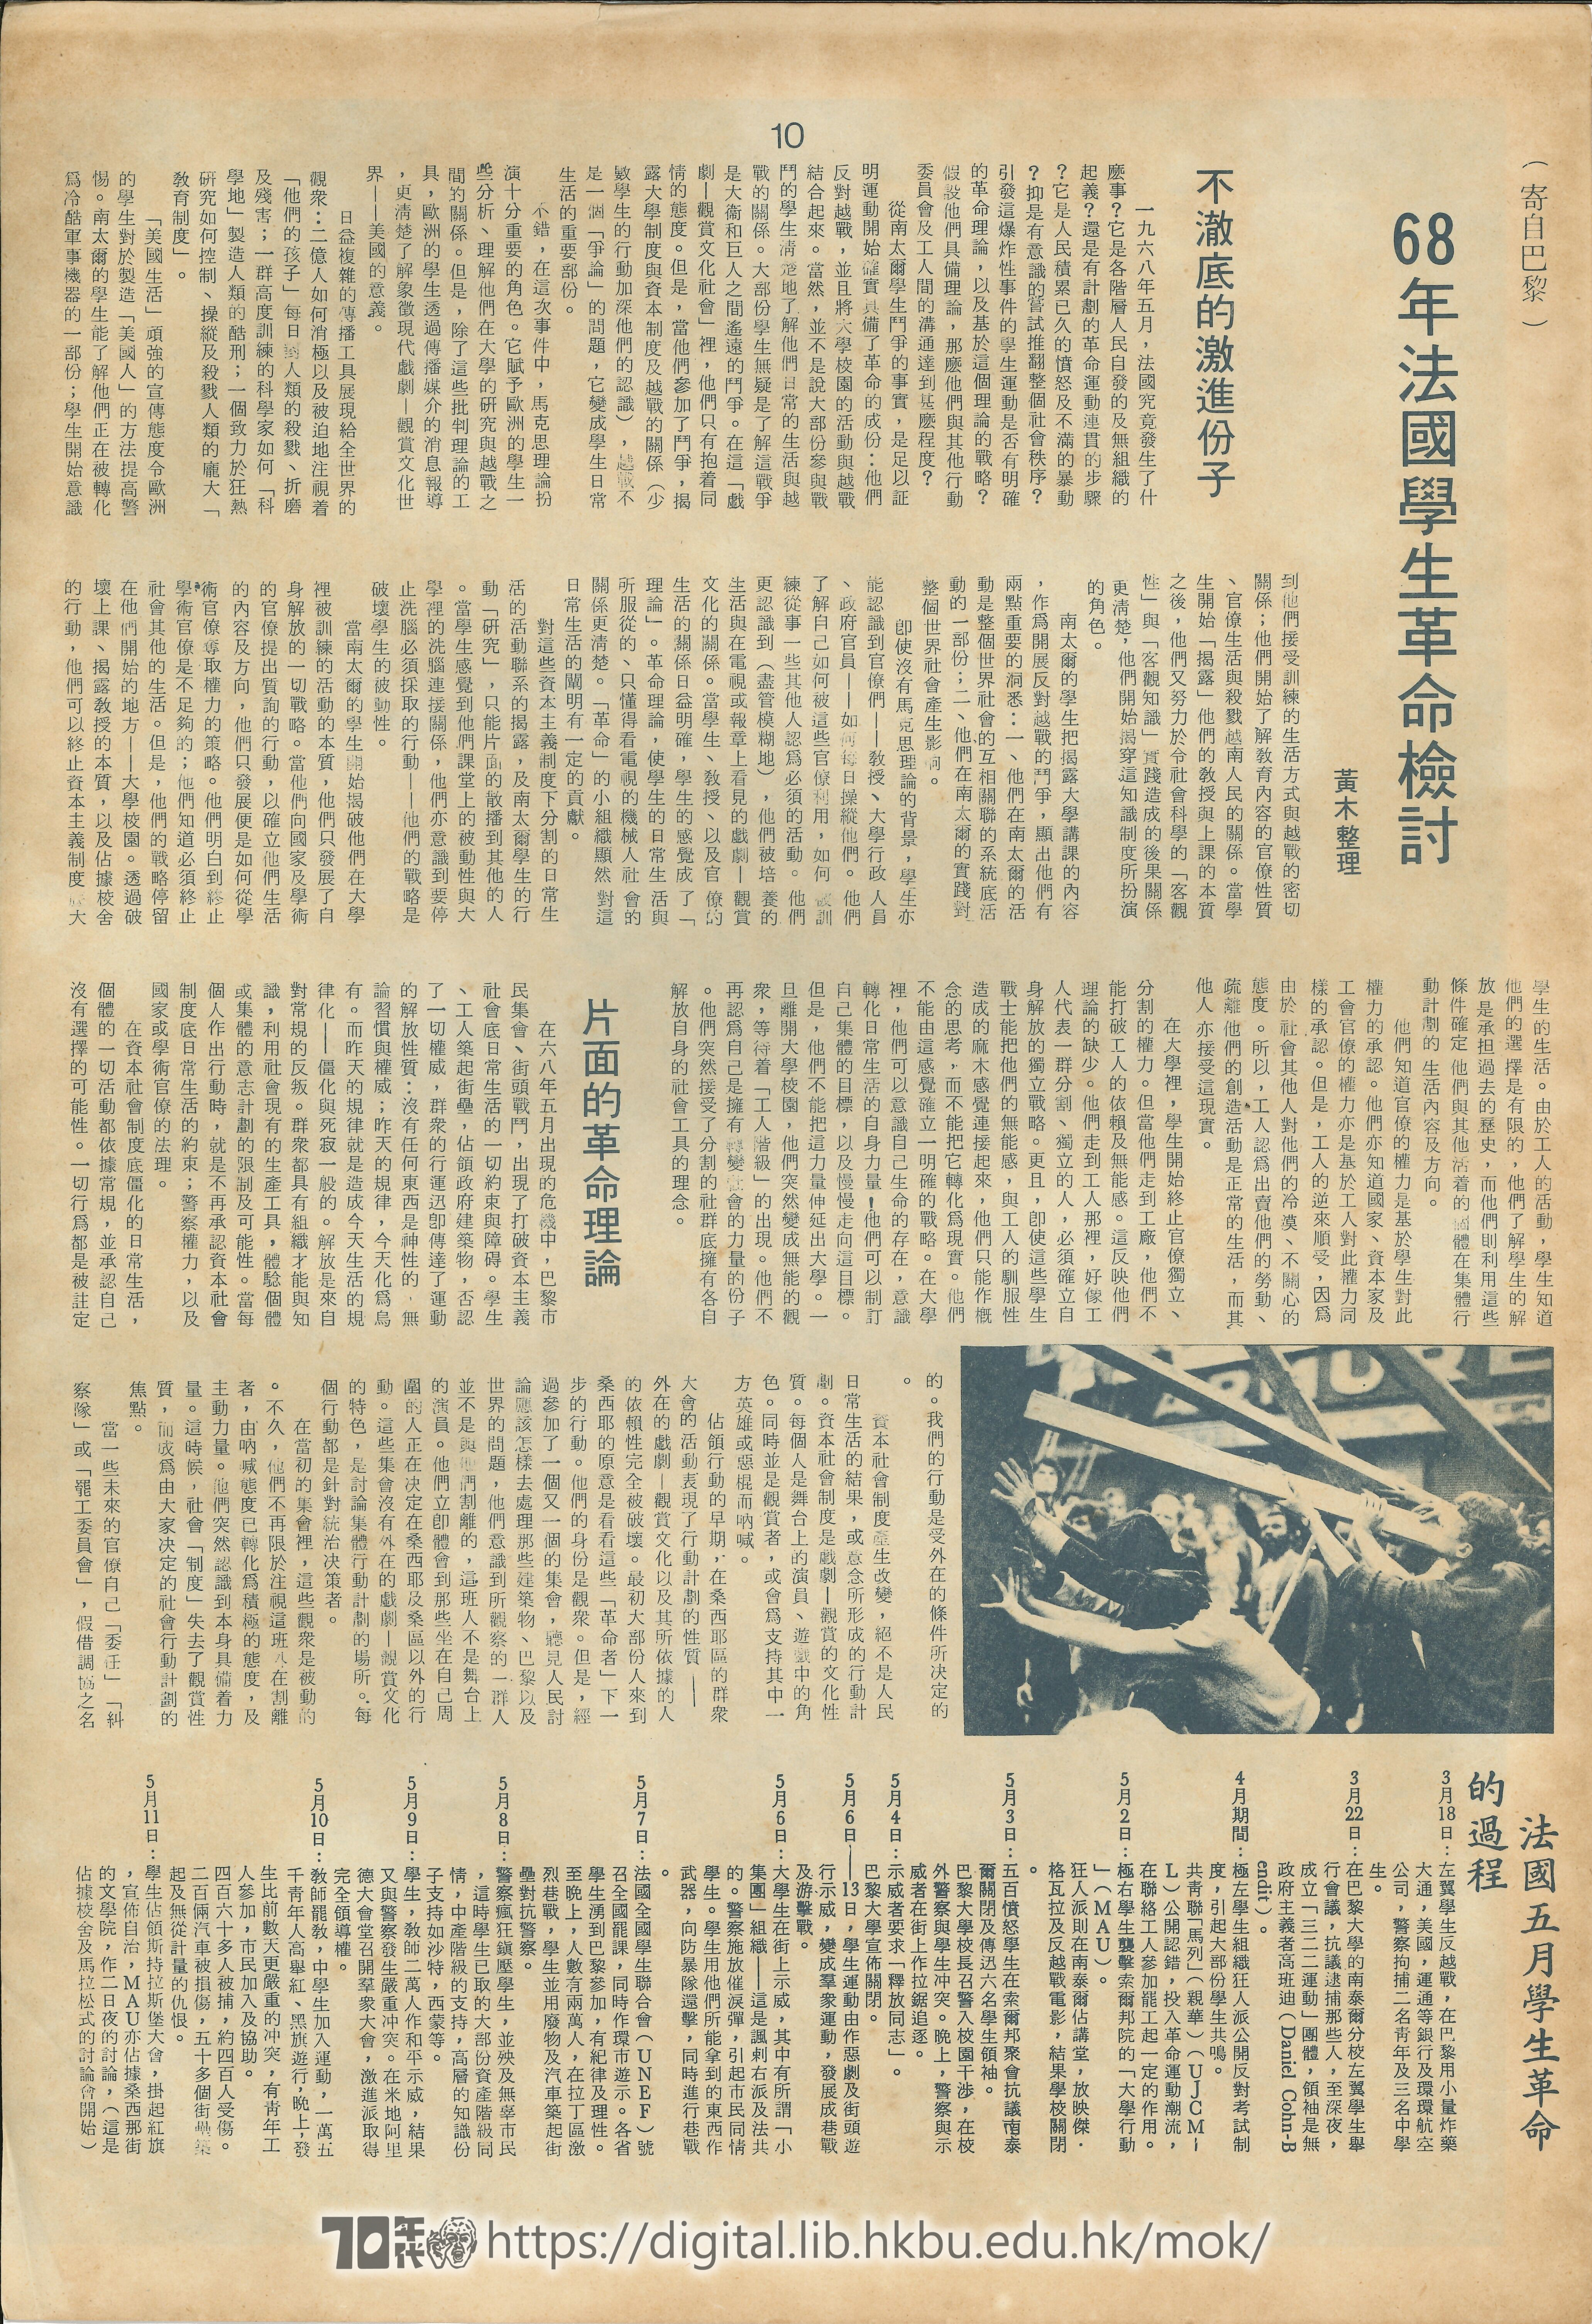  ���������3��� Review of French student revolution 1968 黃木整理 